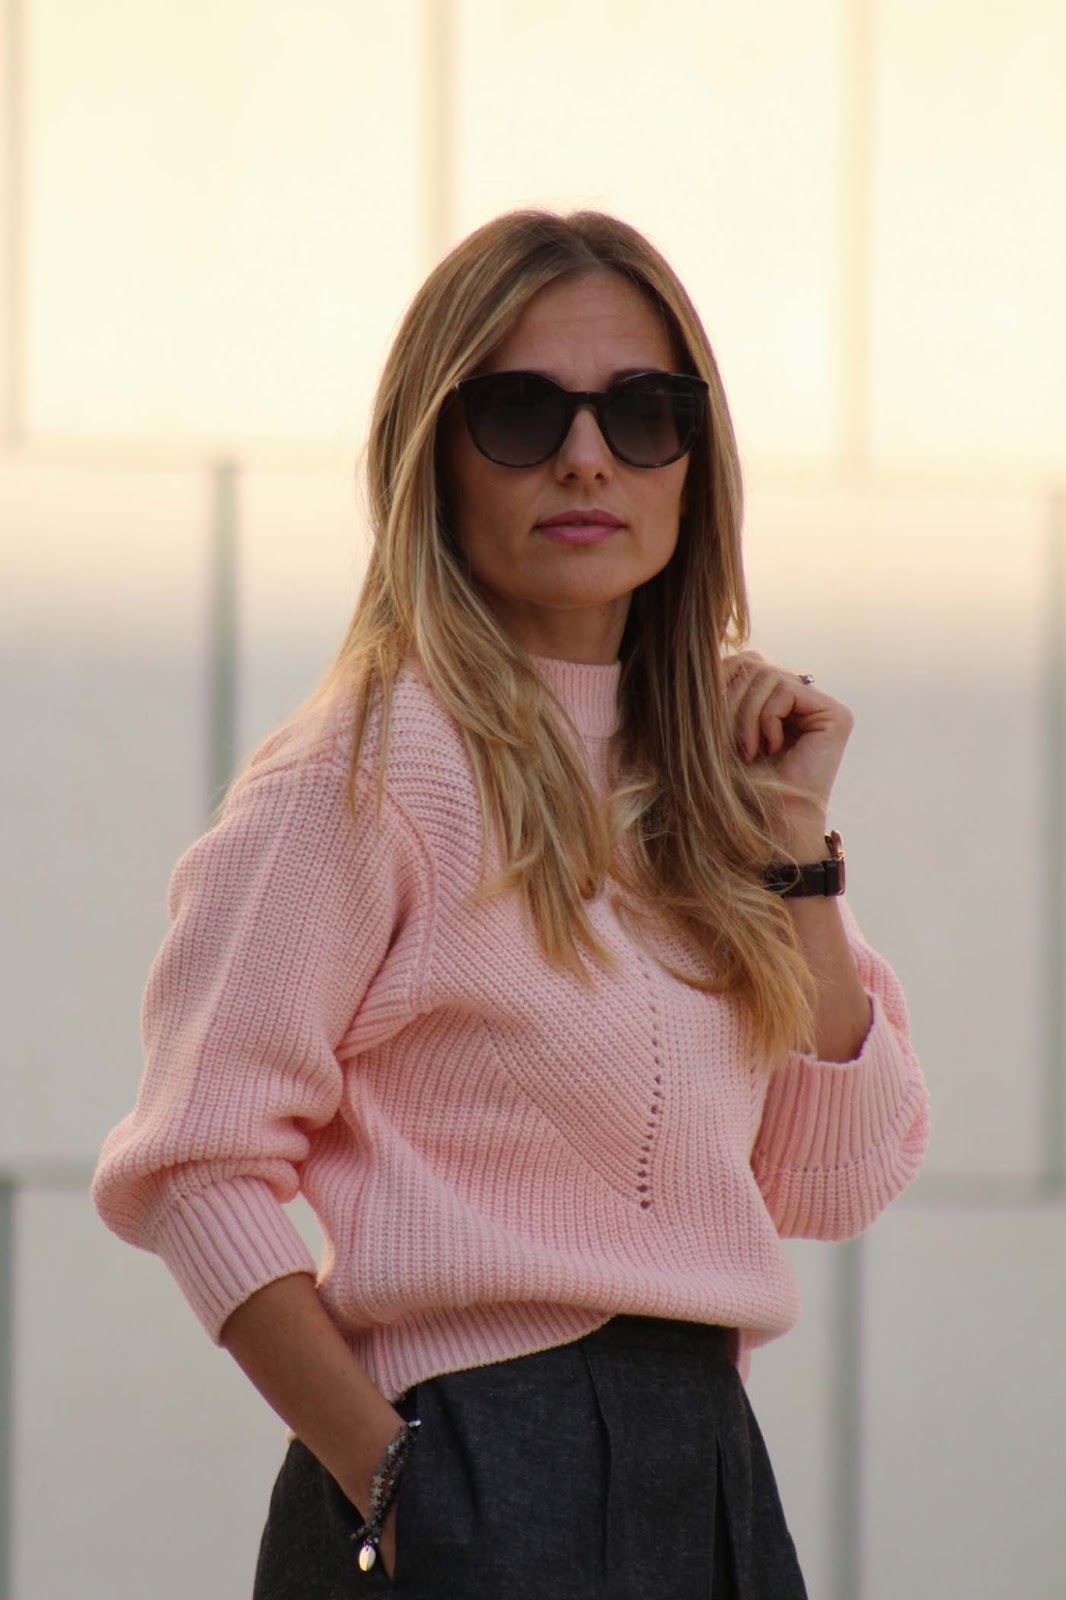 Eniwhere Fashion - Pink sweater - Zaful - Fall's outfit